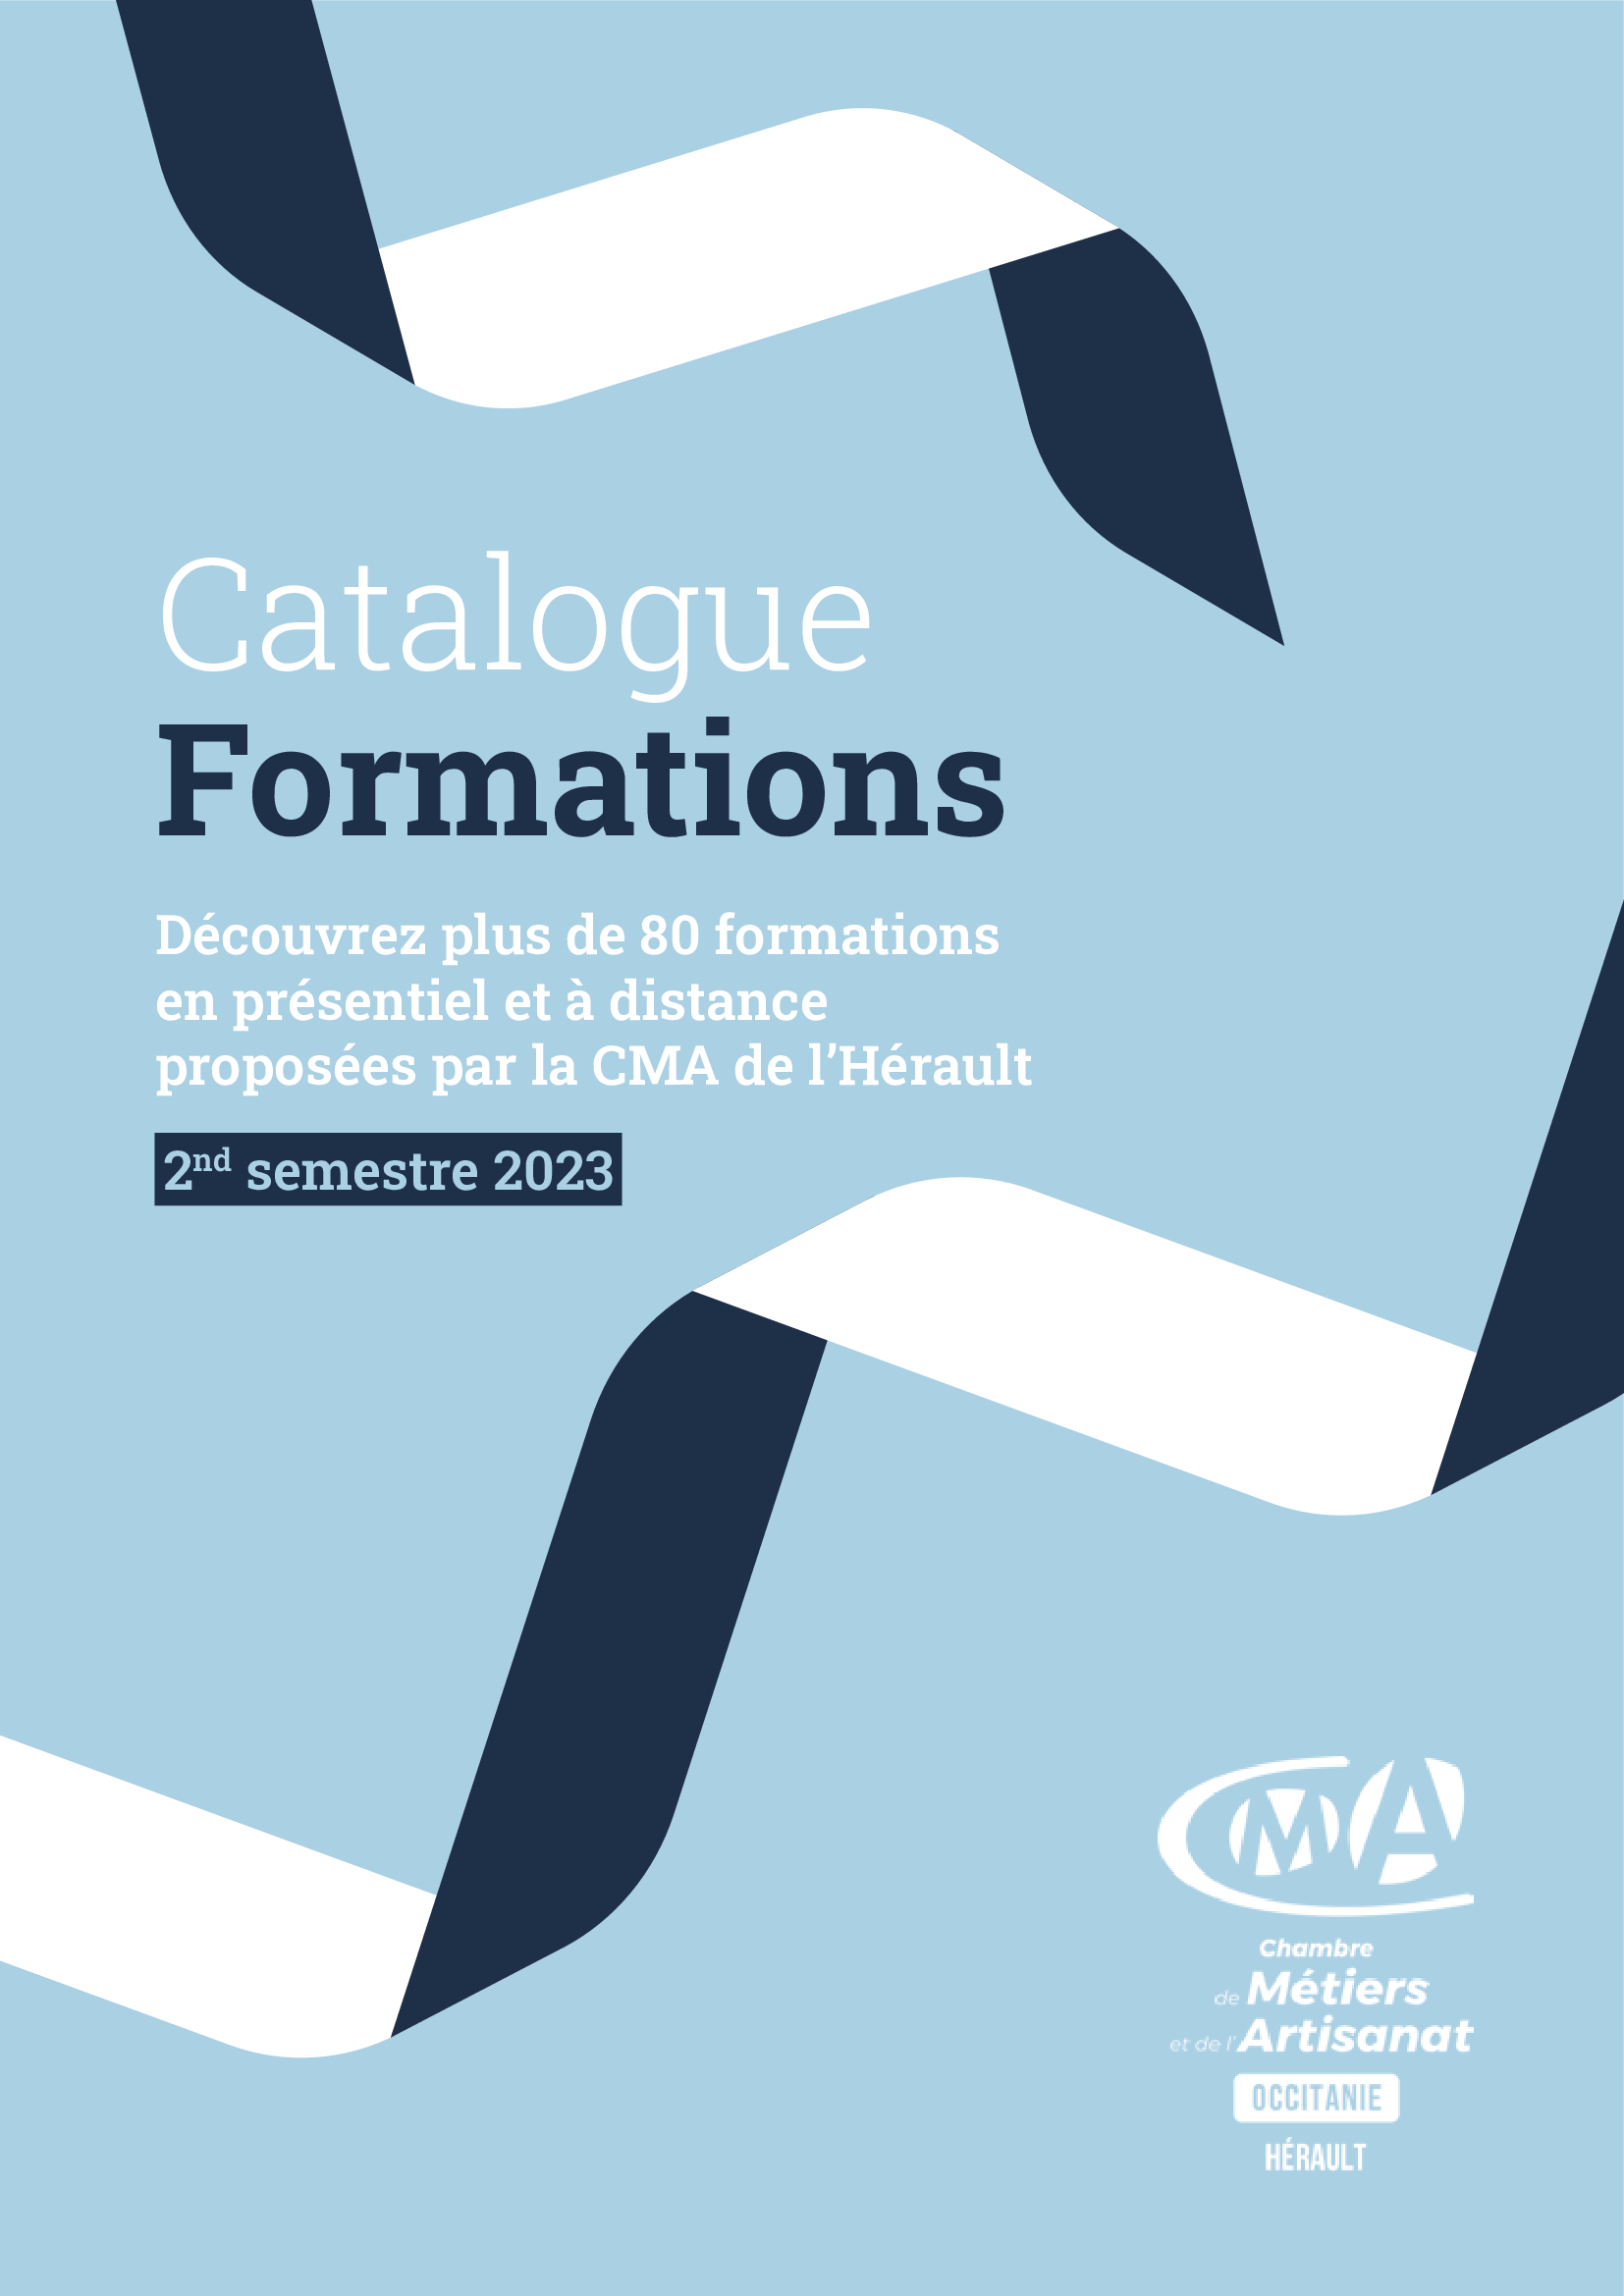 You are currently viewing Guide de formations 2ème semestre